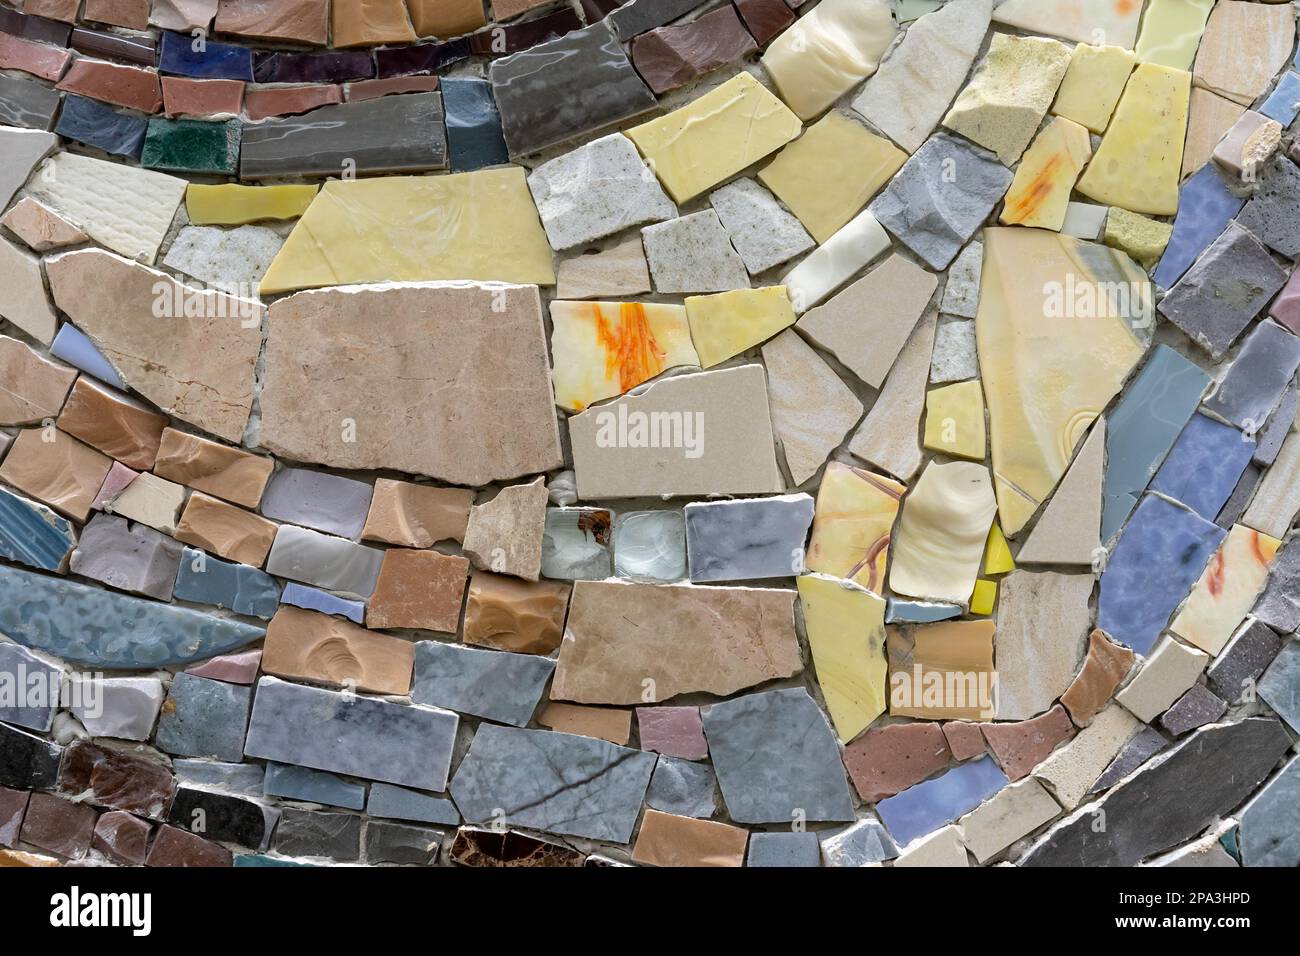 Mosaic panel from pieces of ceramic tiles, marble and granite. Abstract mosaic colored ceramic stones. Stock Photo